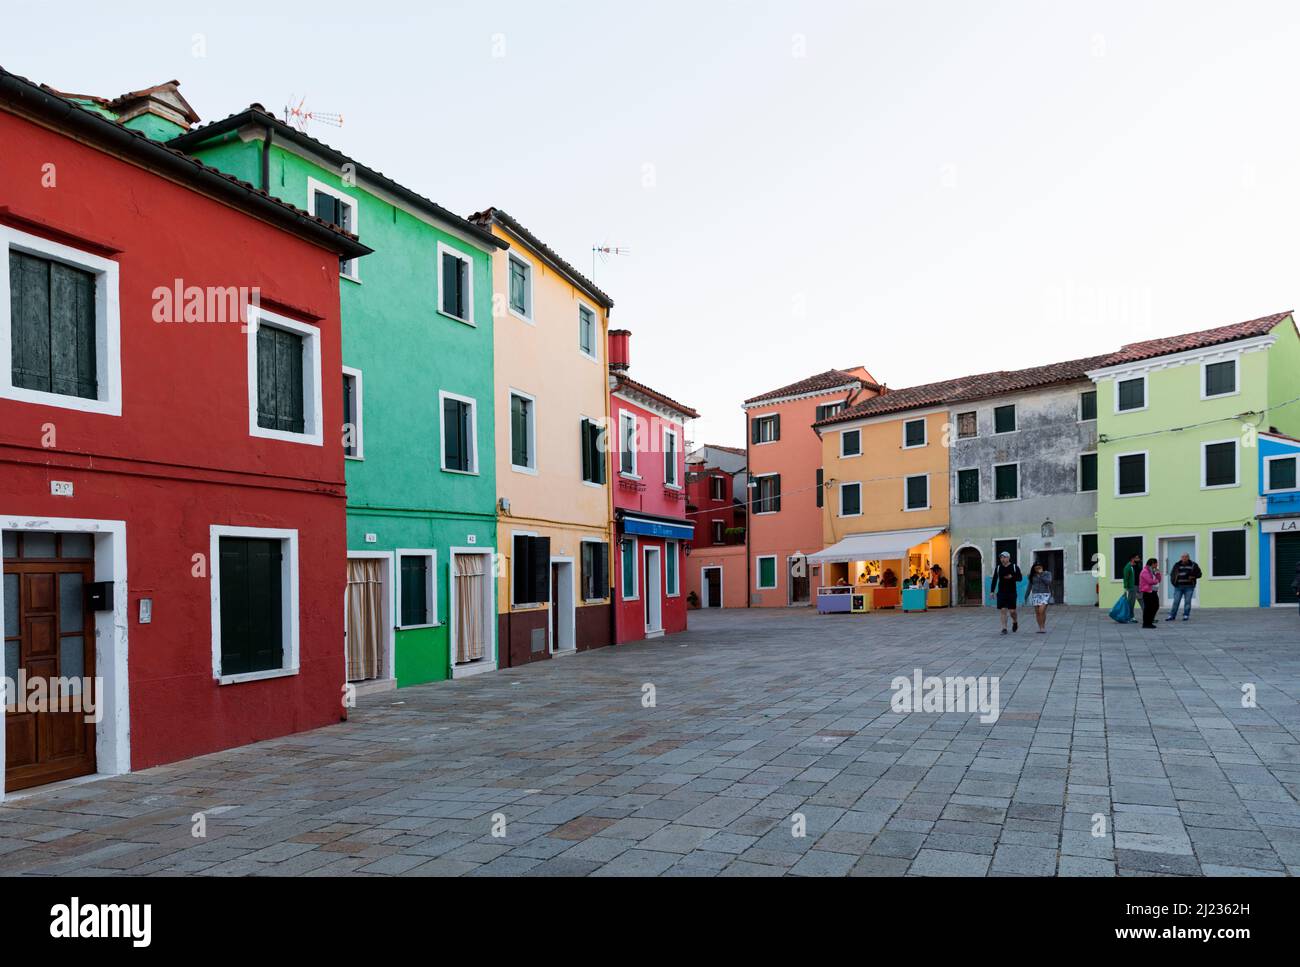 Italy, Venice, Colourful houses and shops on the Venetian island of Burano Stock Photo